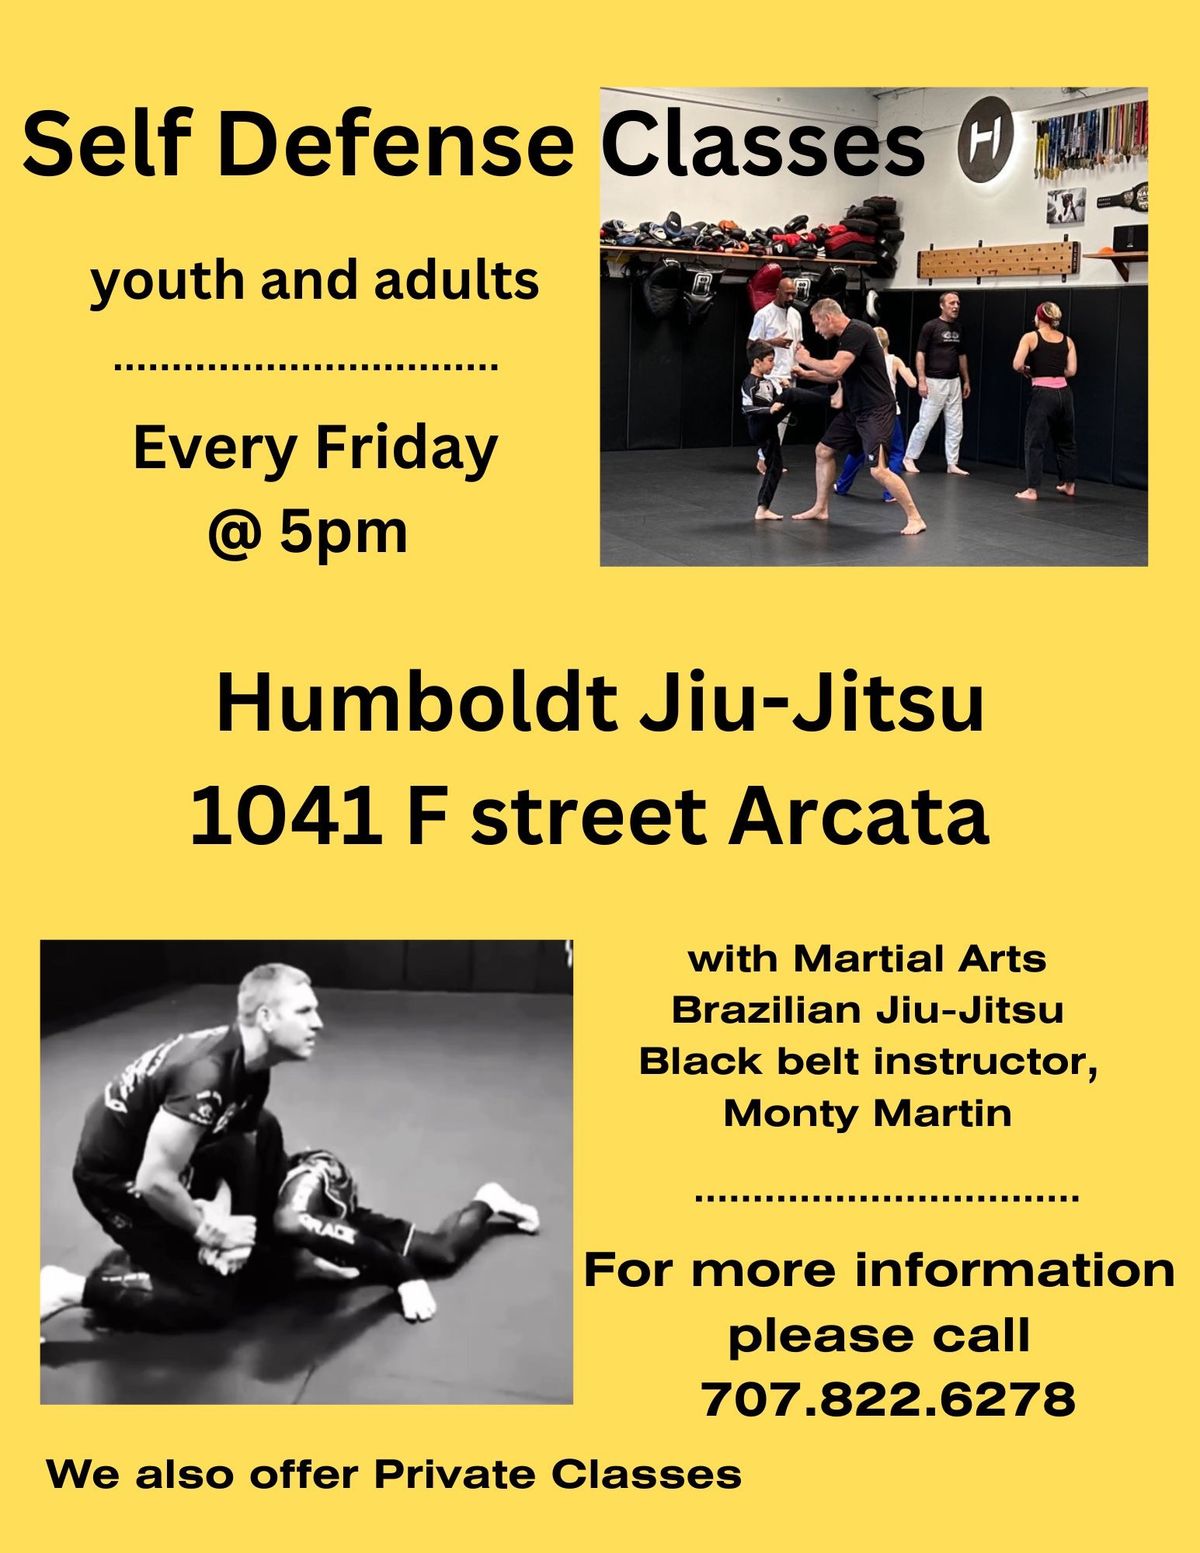 Self Defense Class for Youth & Adults